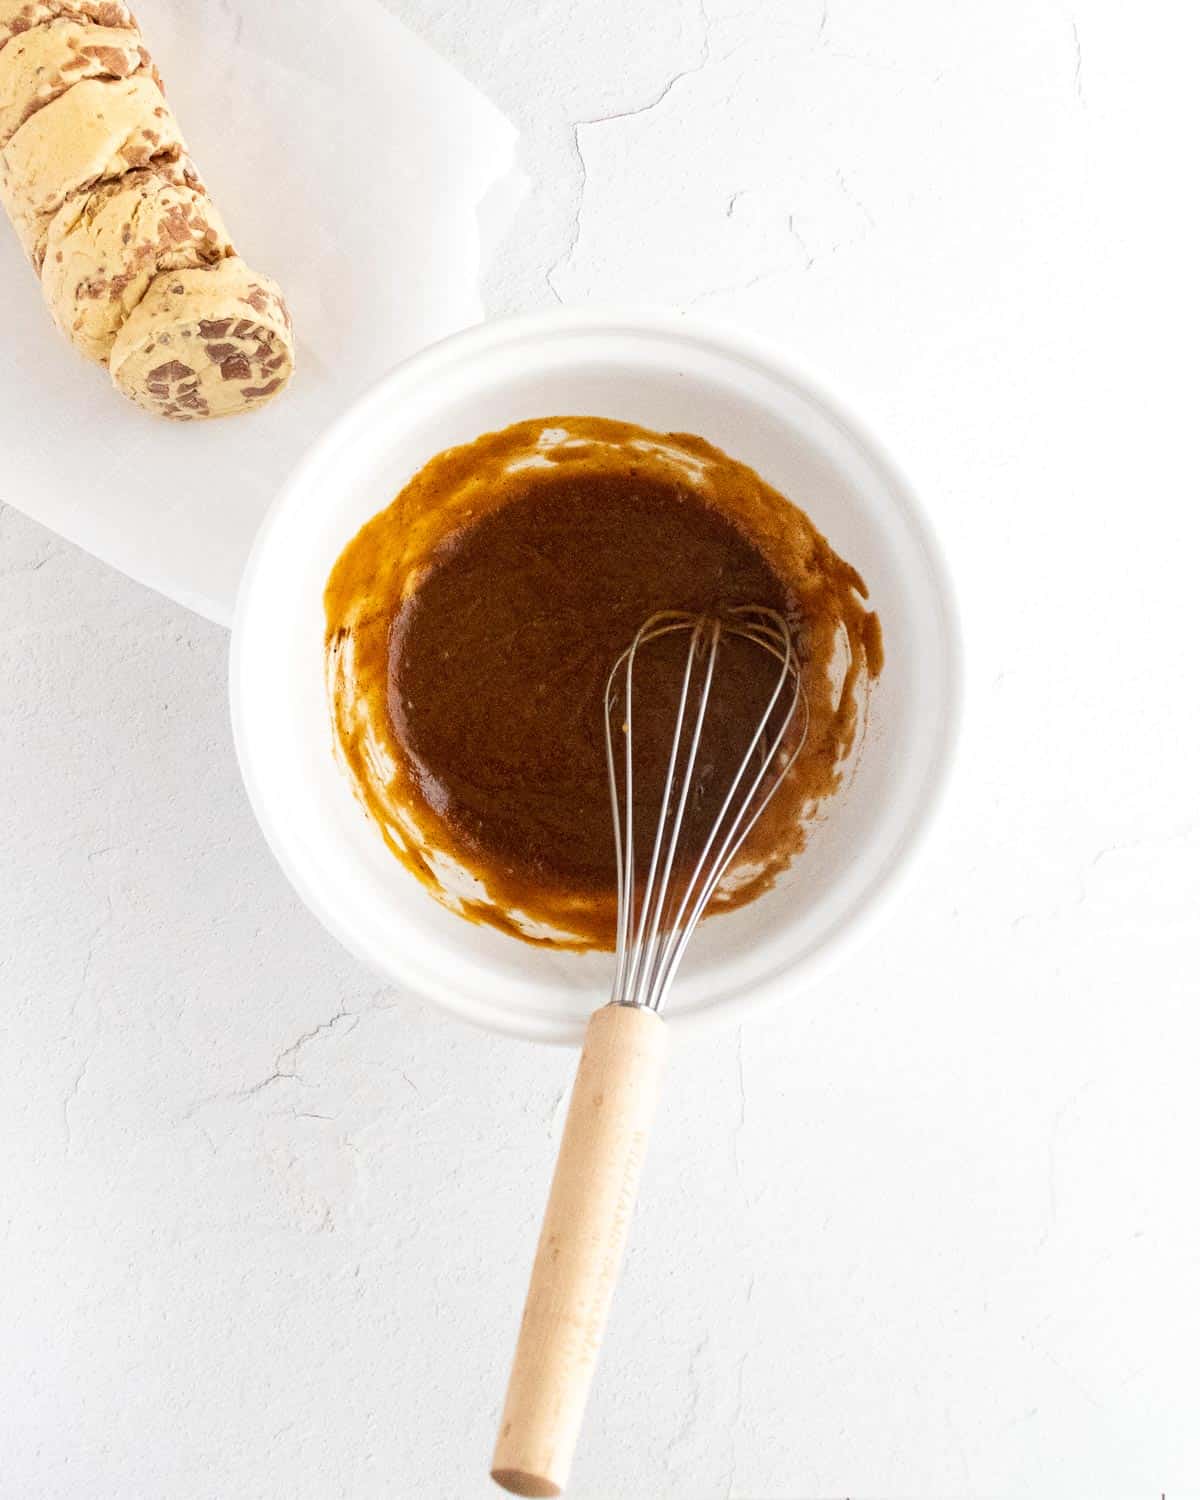 Pumpkin puree mixed with butter and brown sugar and spices in a white bowl with whisk.